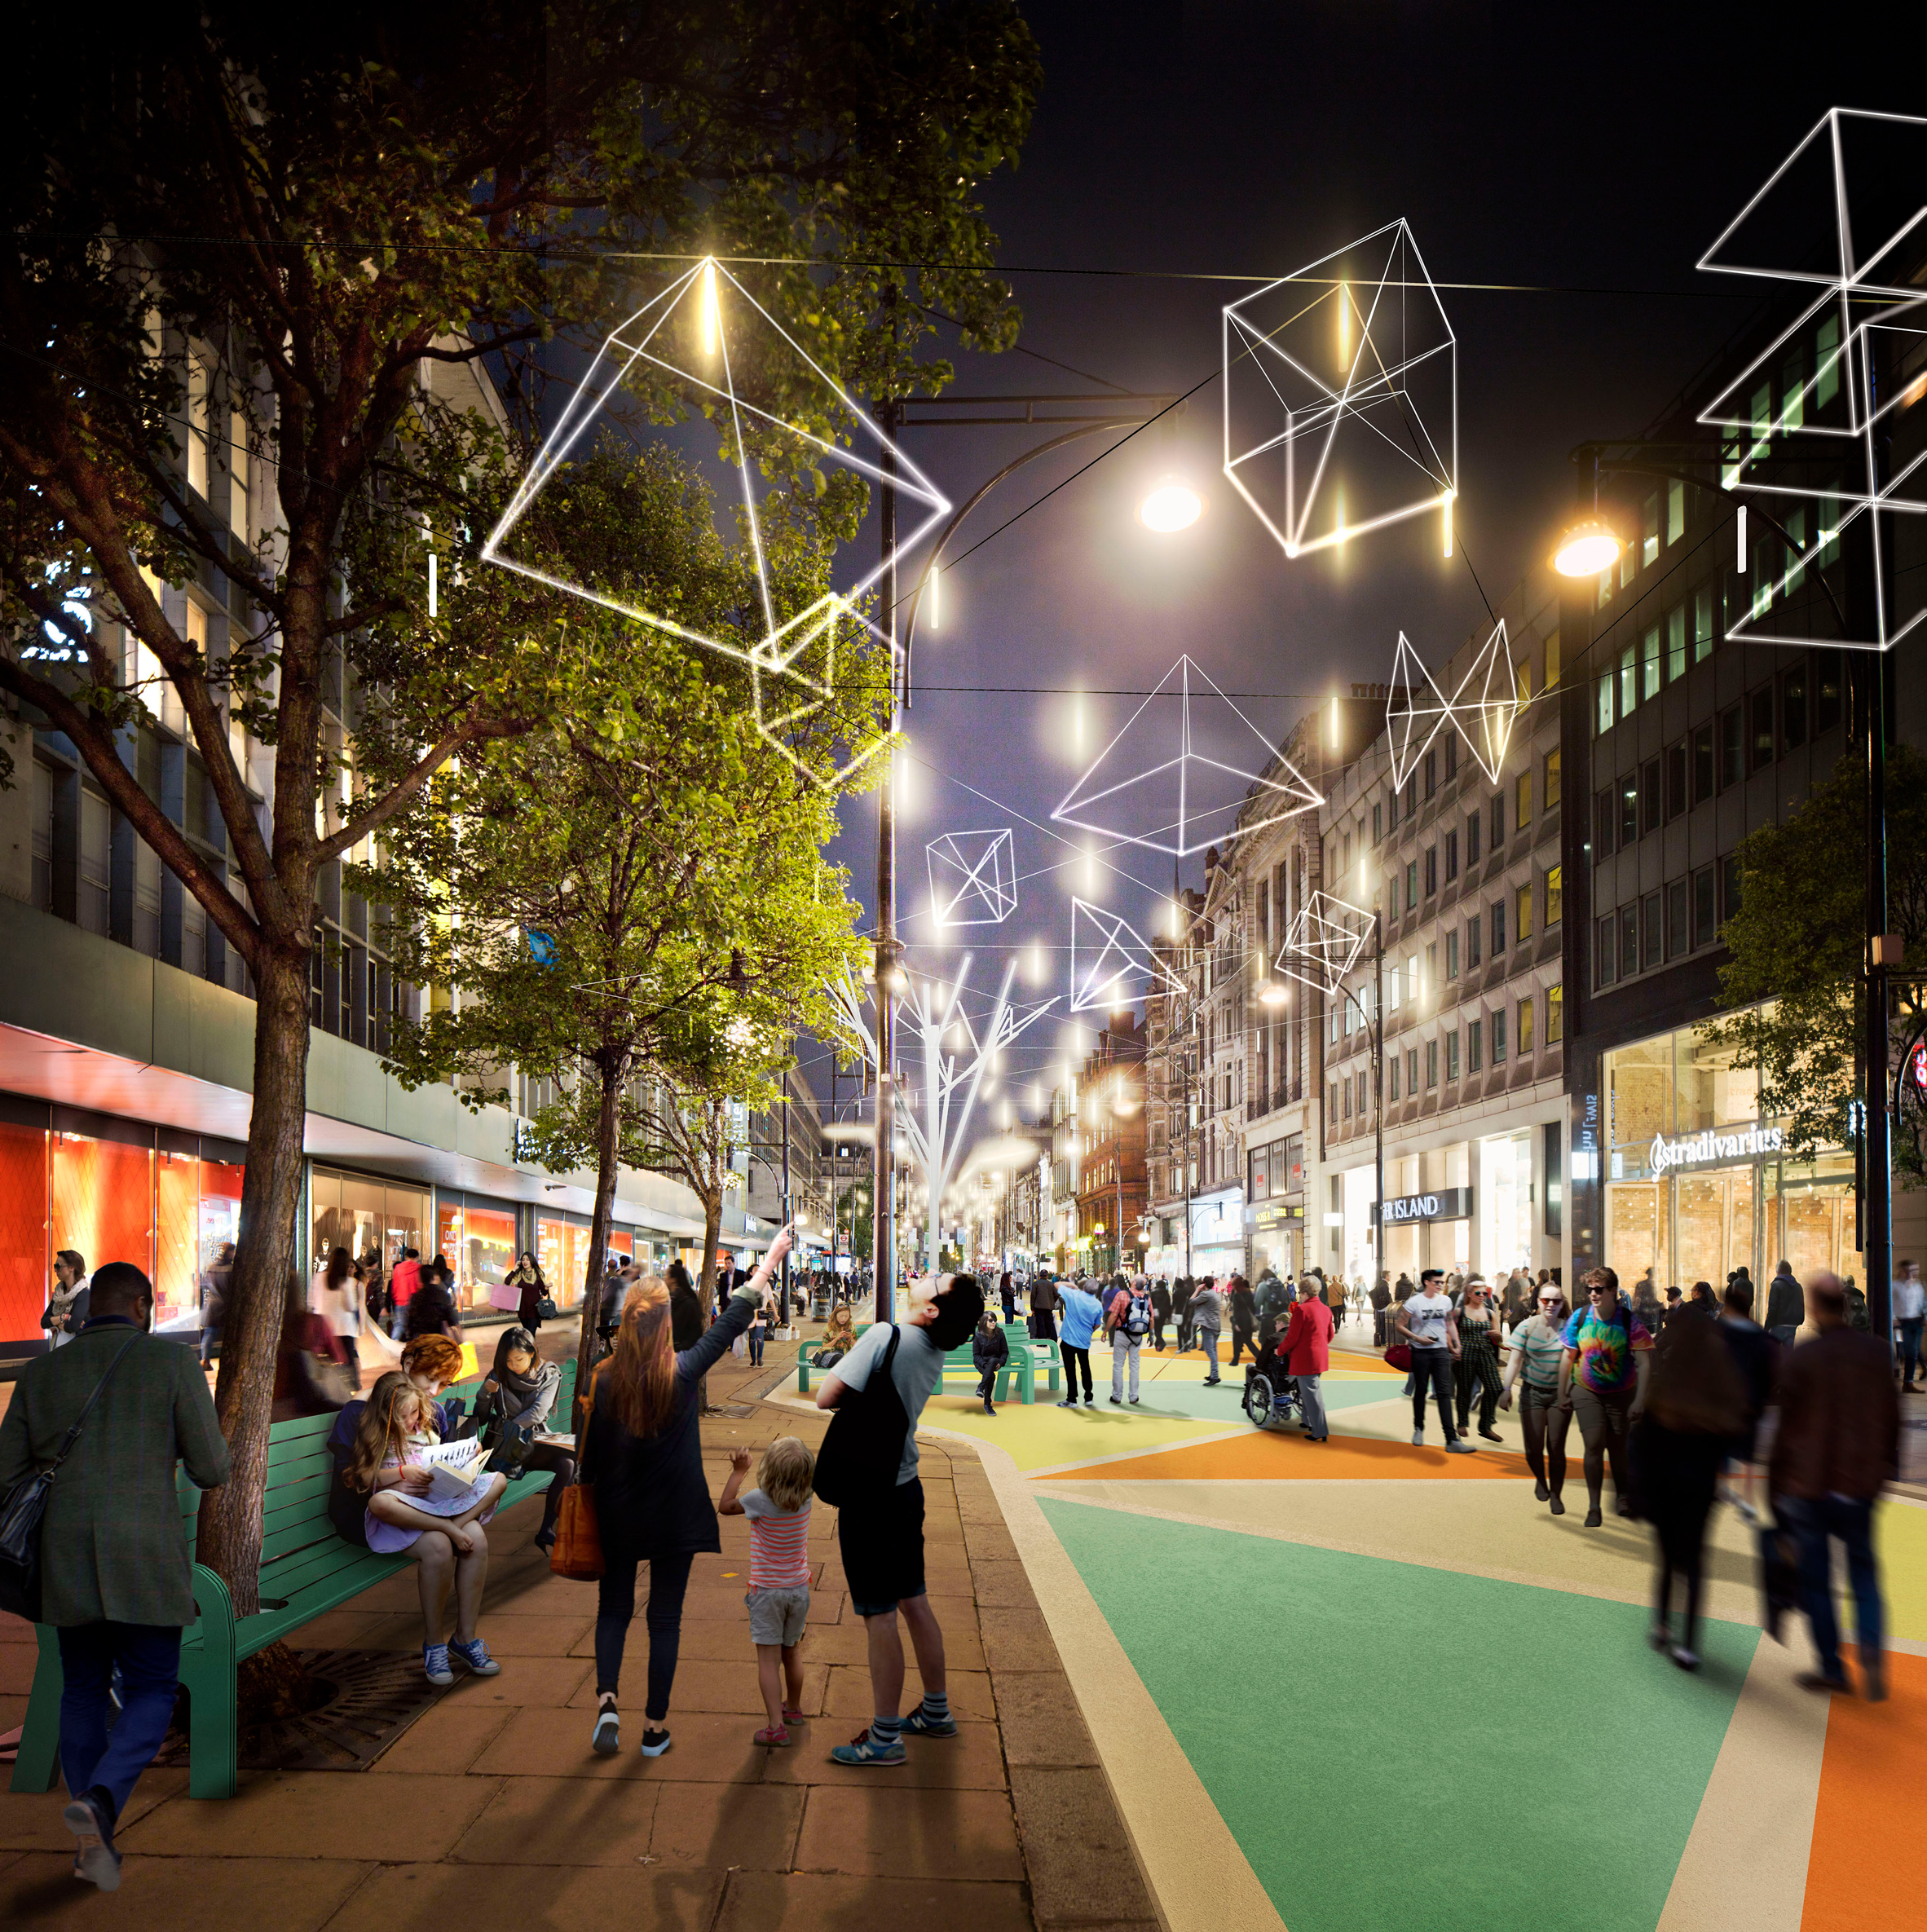 Oxford Street remains Europe's busiest shopping hub, Regent Street top  luxury attraction